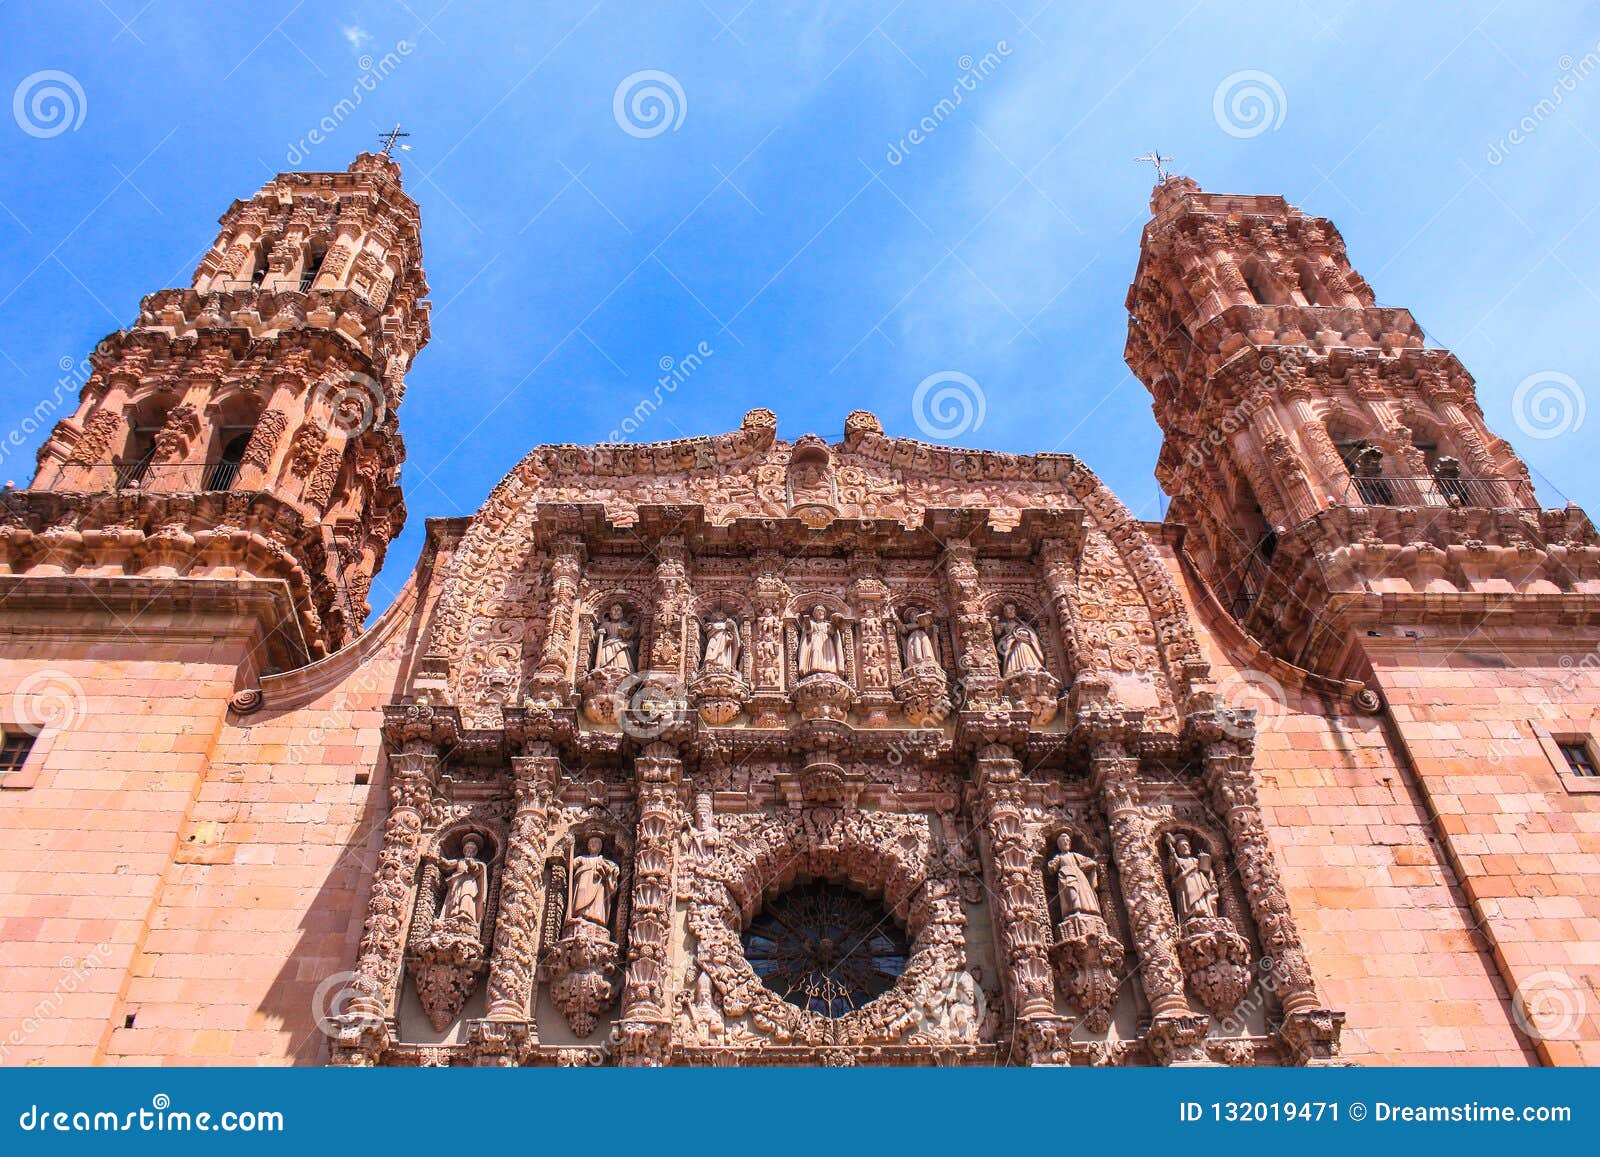 zacatecas down town church. traditional arquitecture. mexico magic town.